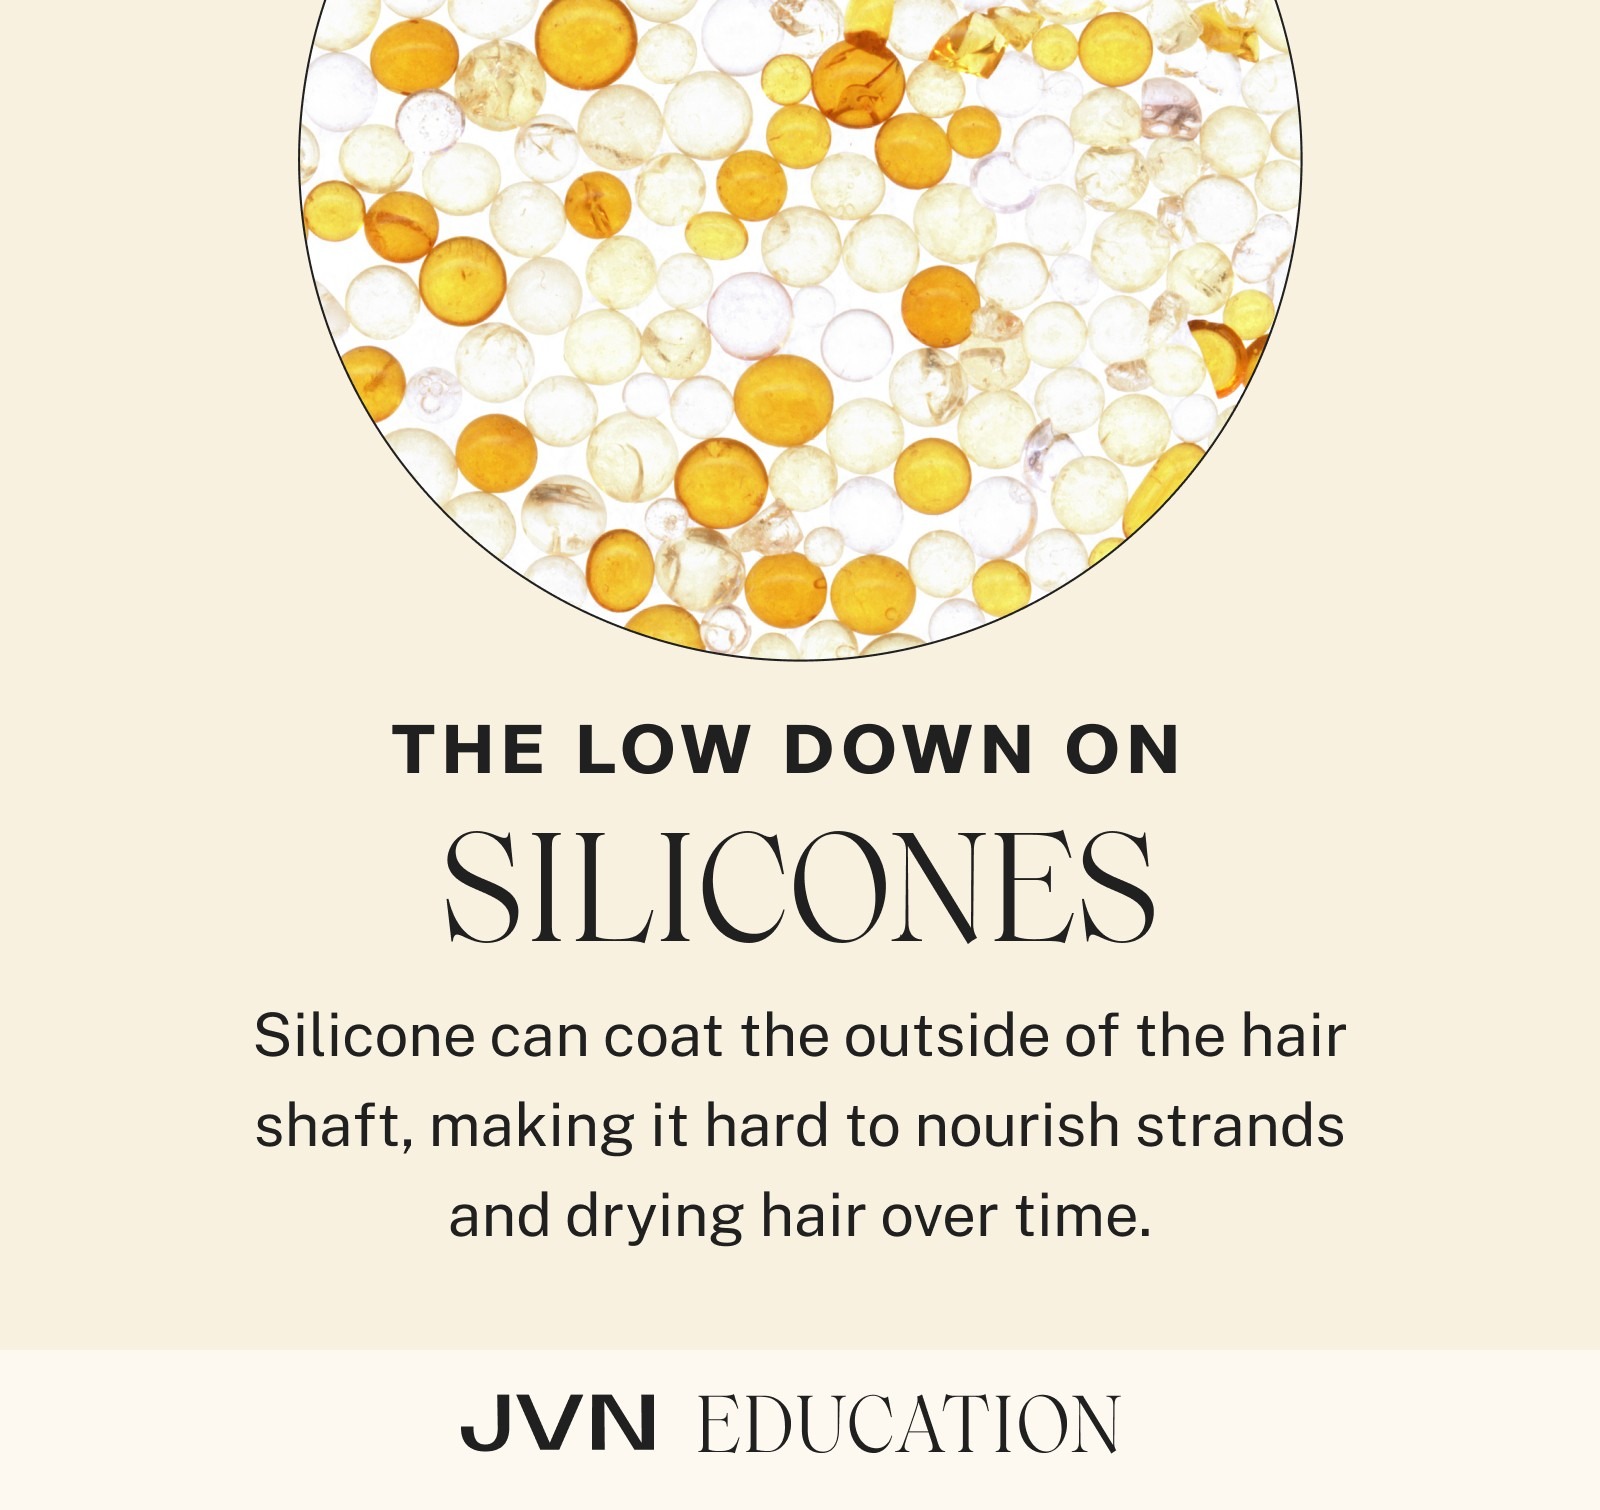 Silicone free shampoo and conditioner hair products. Silicones can coat the outside of the hair shaft. making it hard to nourish strands and drying hair over time